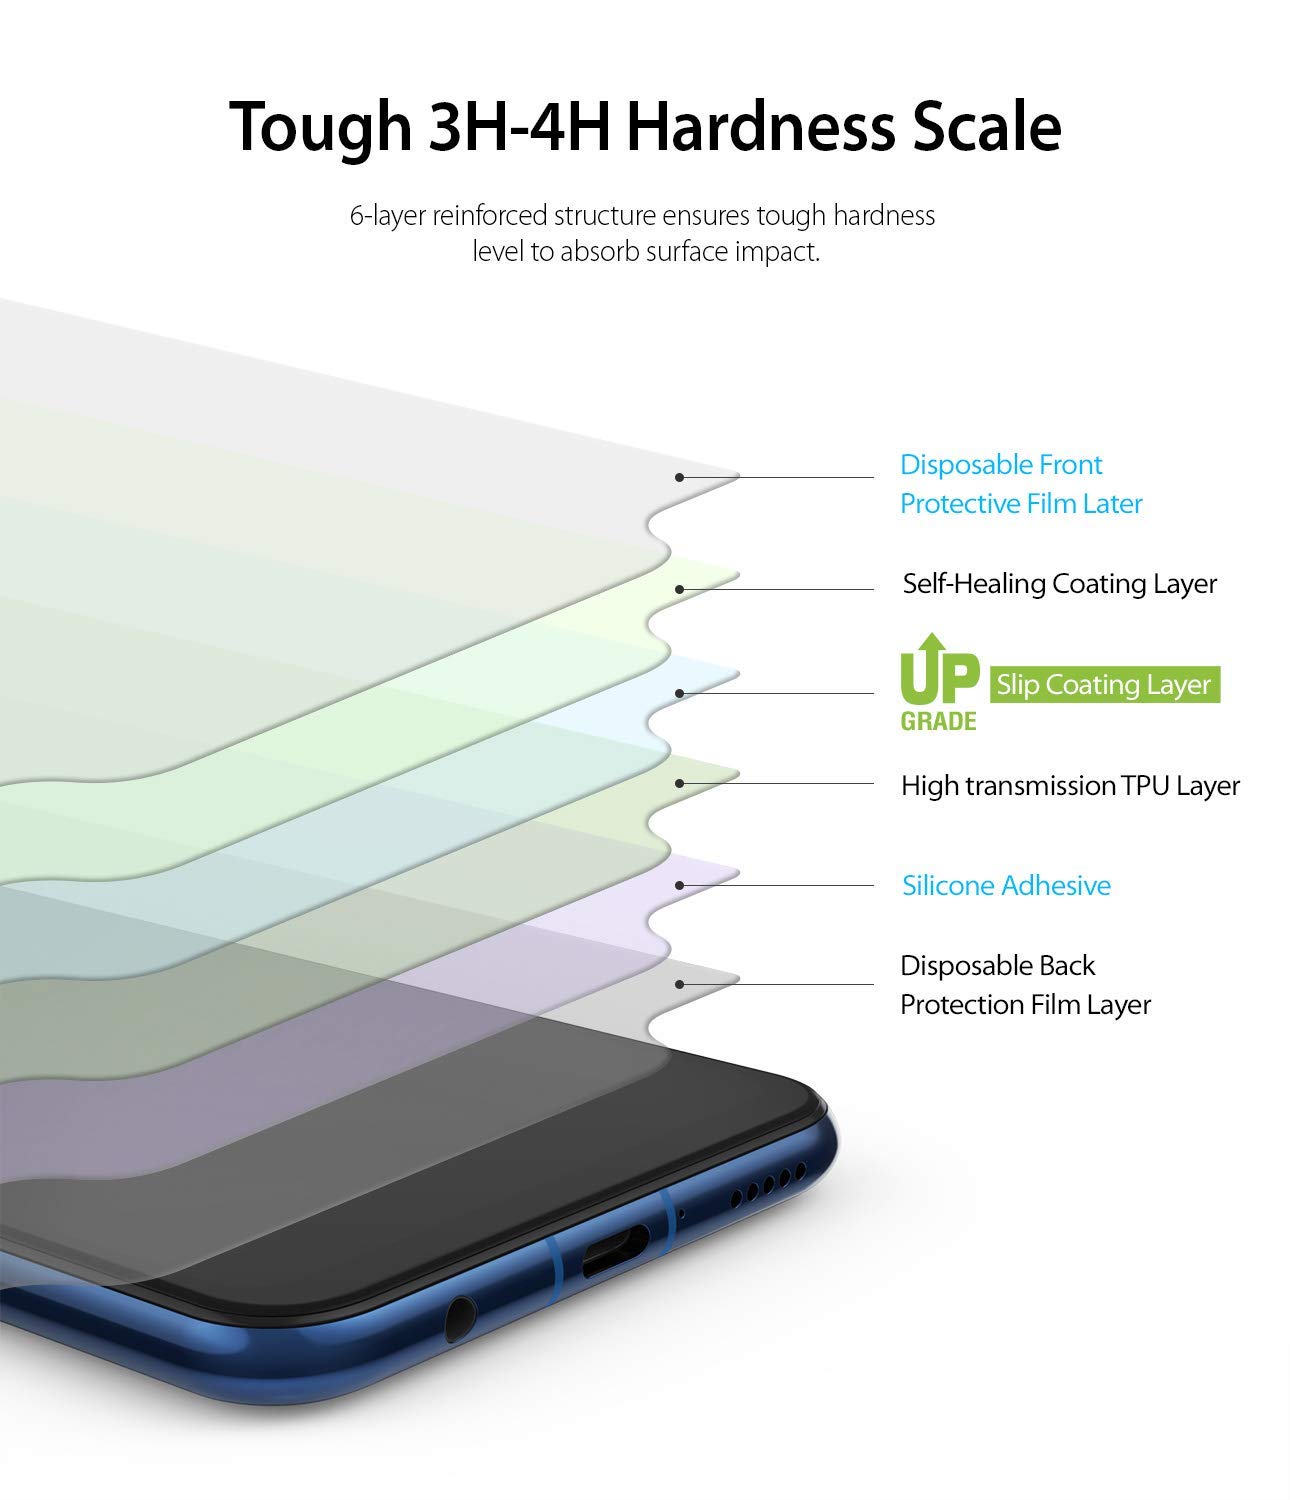 tough 3h-4h hardness scale